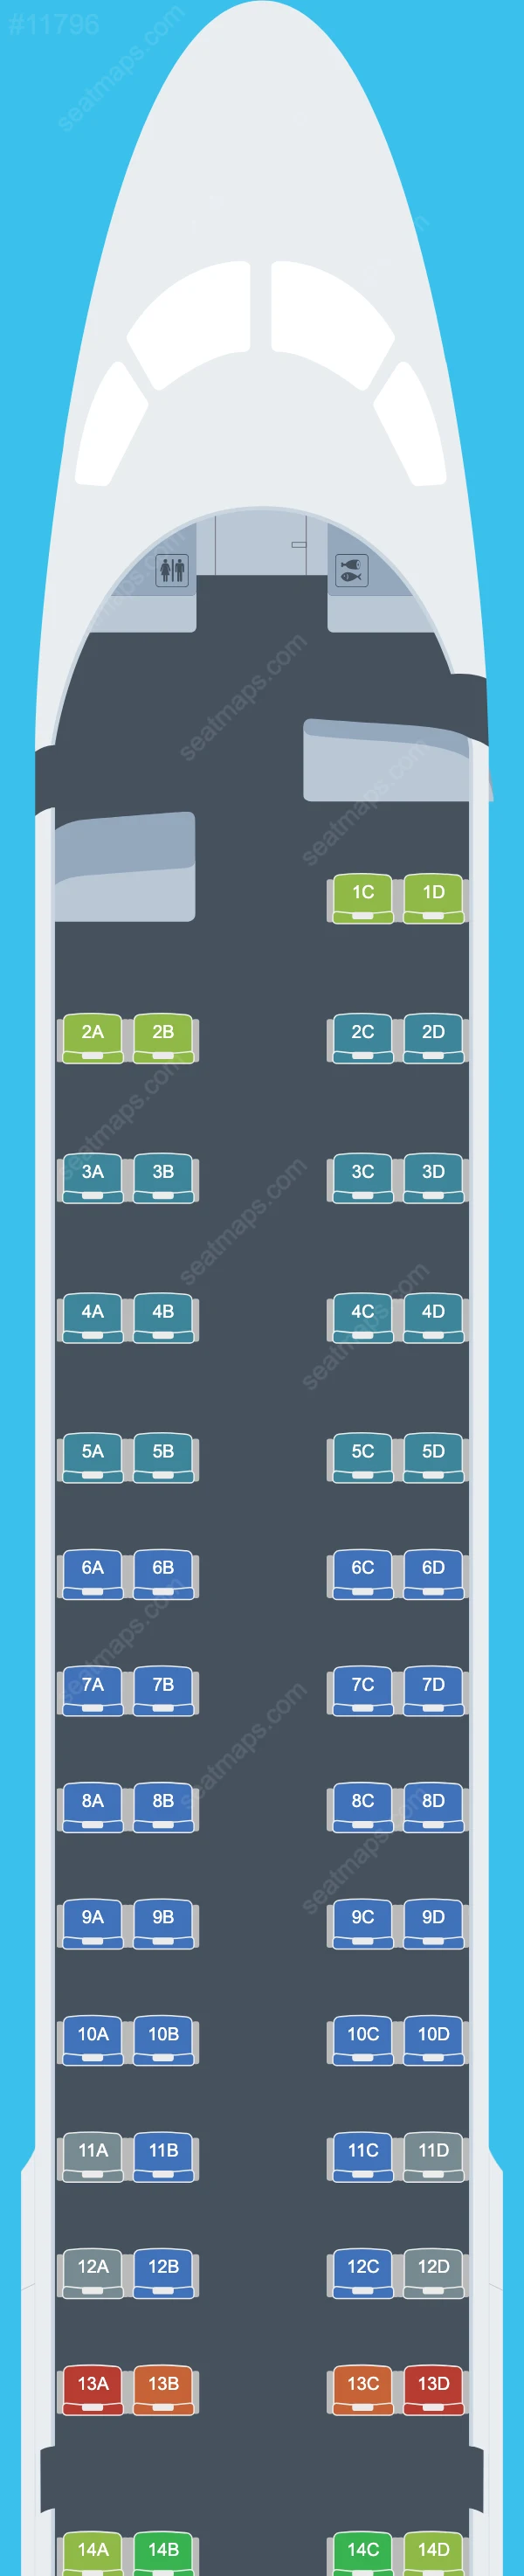 Lumiwings Embraer E195 seatmap preview